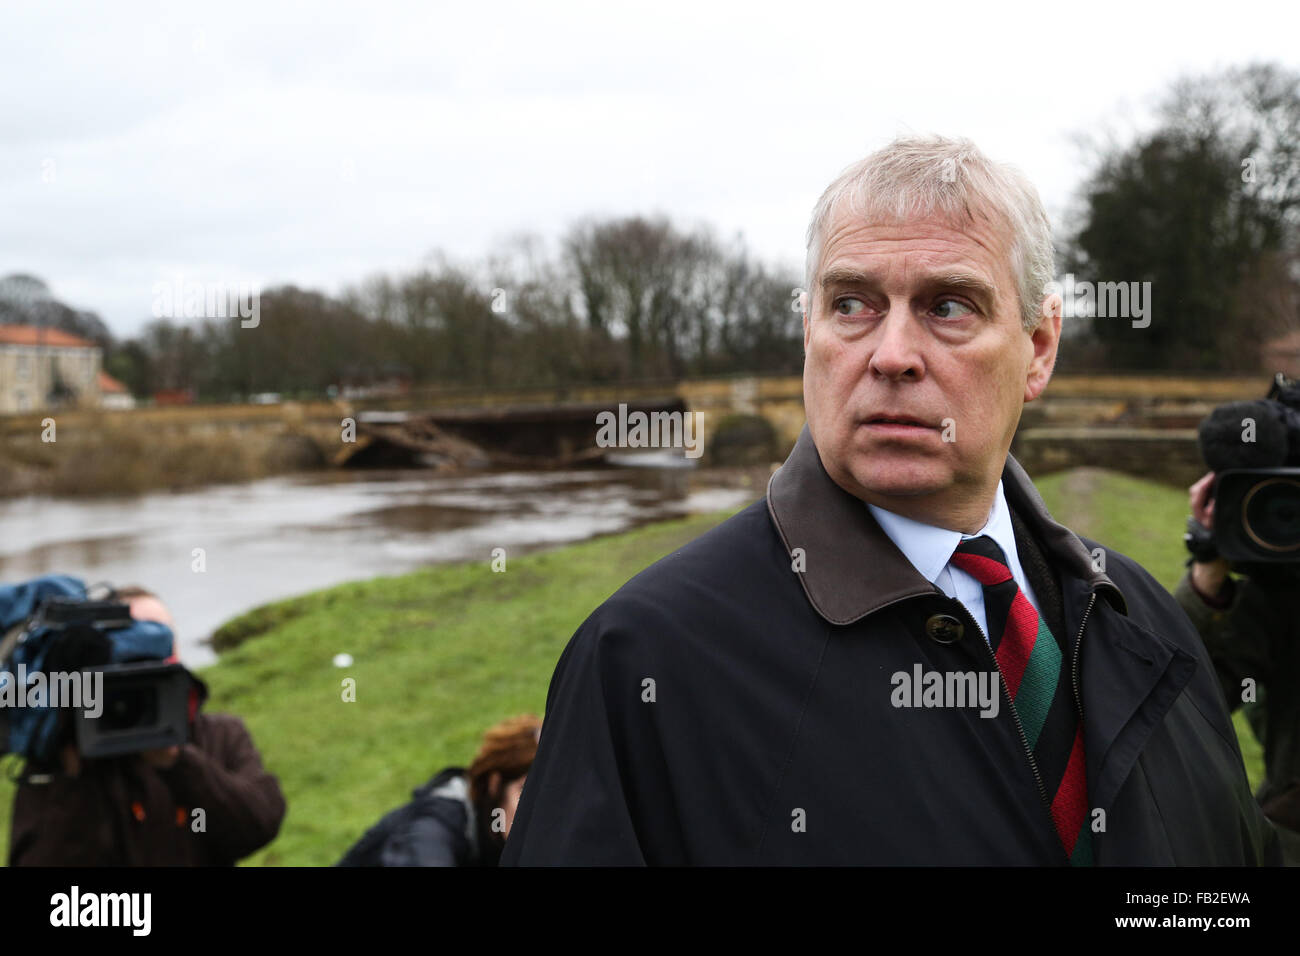 Prince Andrew, The Duke of York, in front of the damaged Tadcaster Bridge during his visit to the town of Tadcaster in North Yorkshire to see the damage caused by flooding in the last month. The town was heavily affected after the River Wharfe burst it's banks causing the bridge to partially collapse. Credit:  Ian Hinchliffe/Alamy Live News Stock Photo